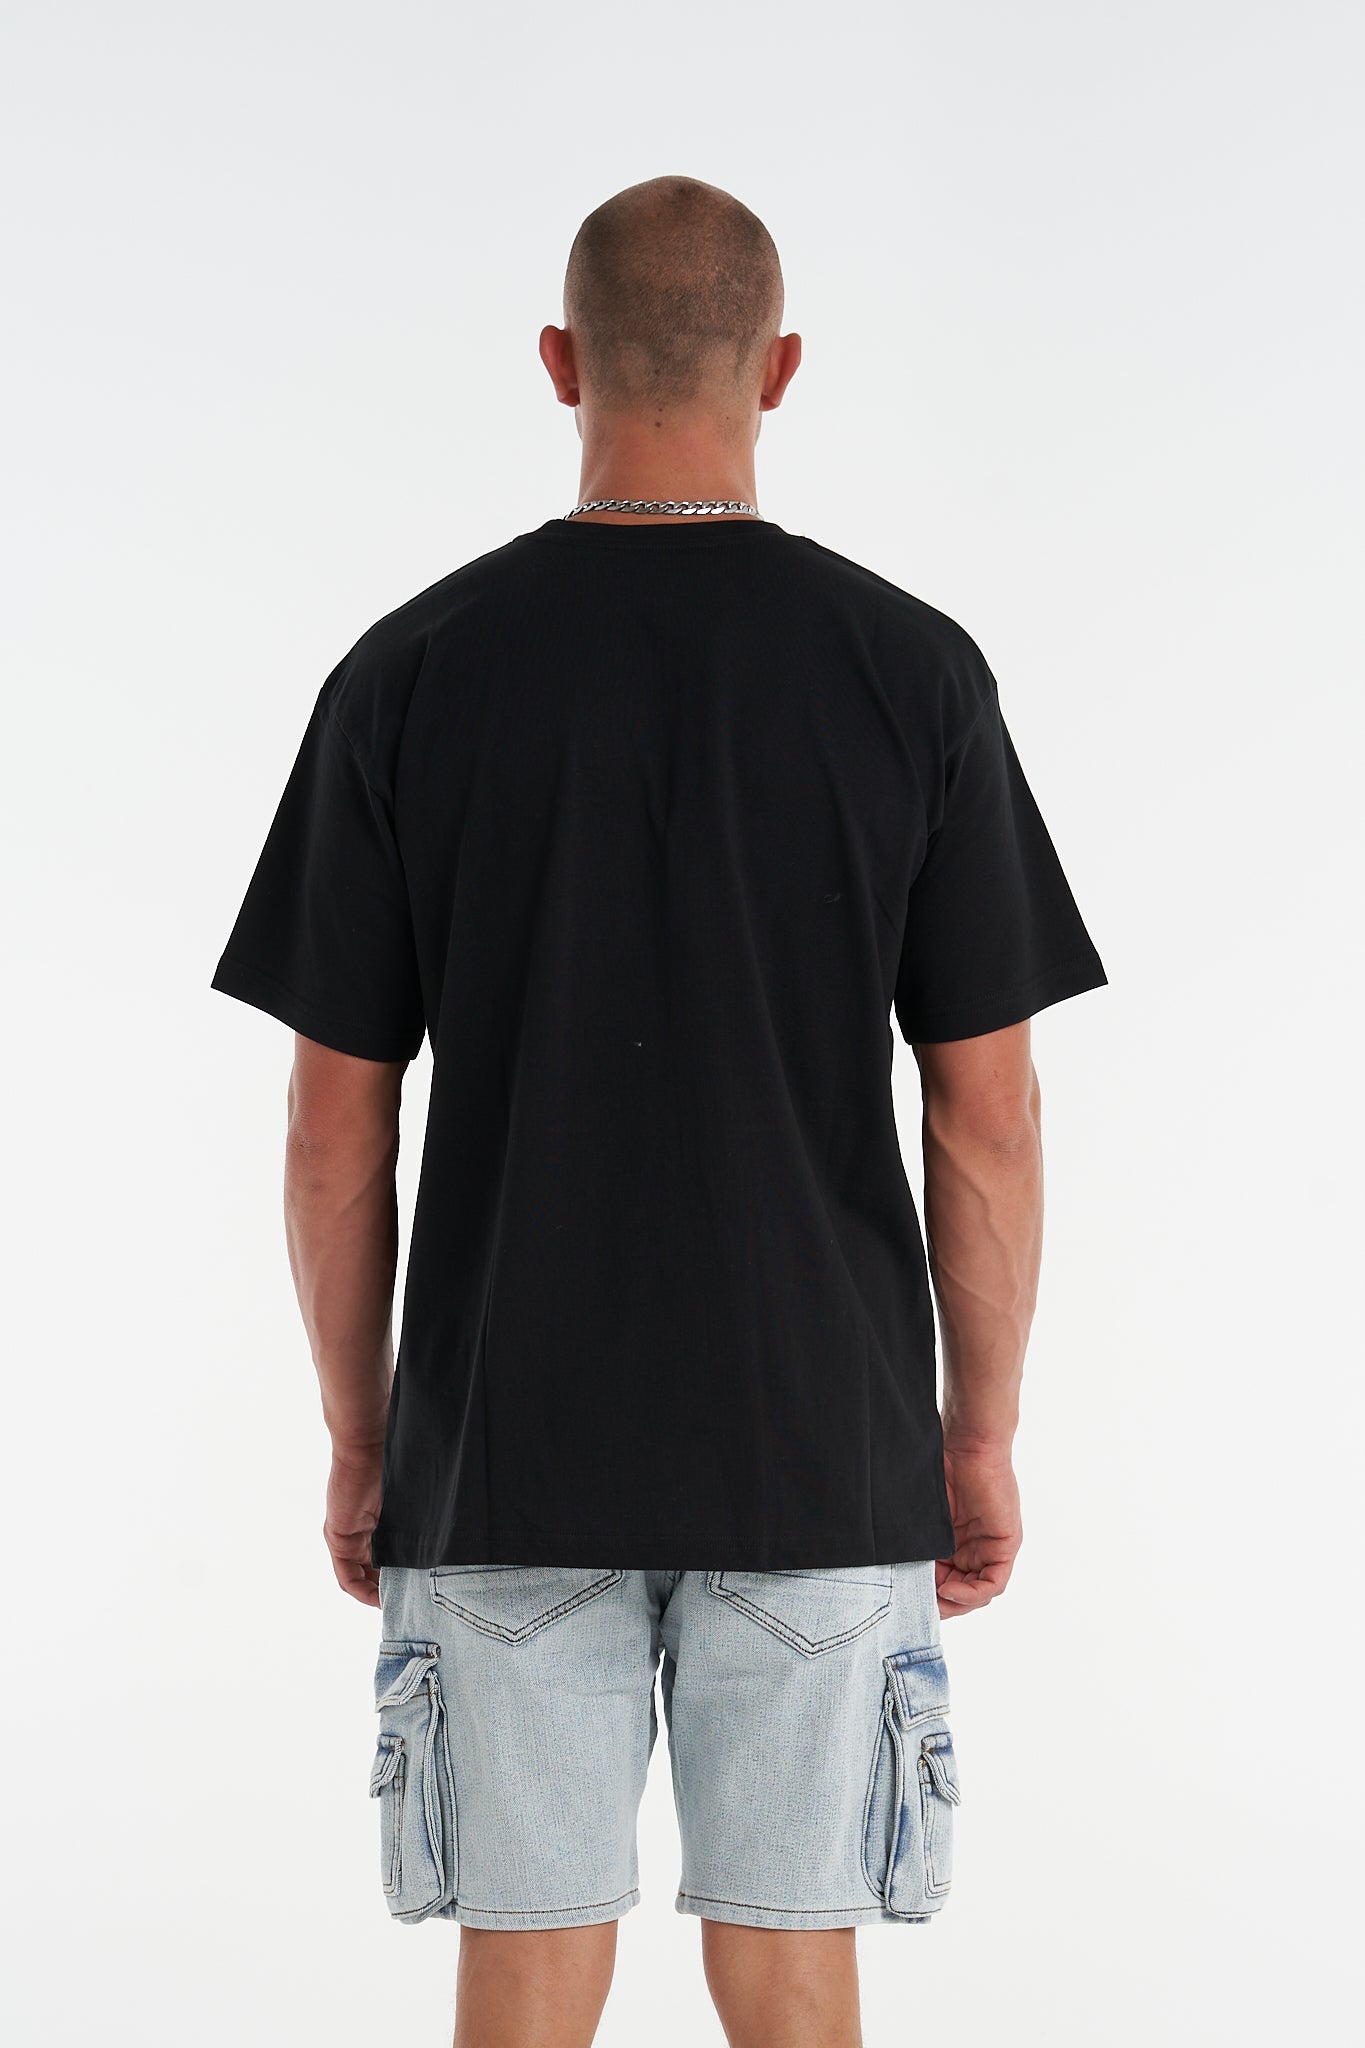 Respect Relaxed Fit Premium Tee Black